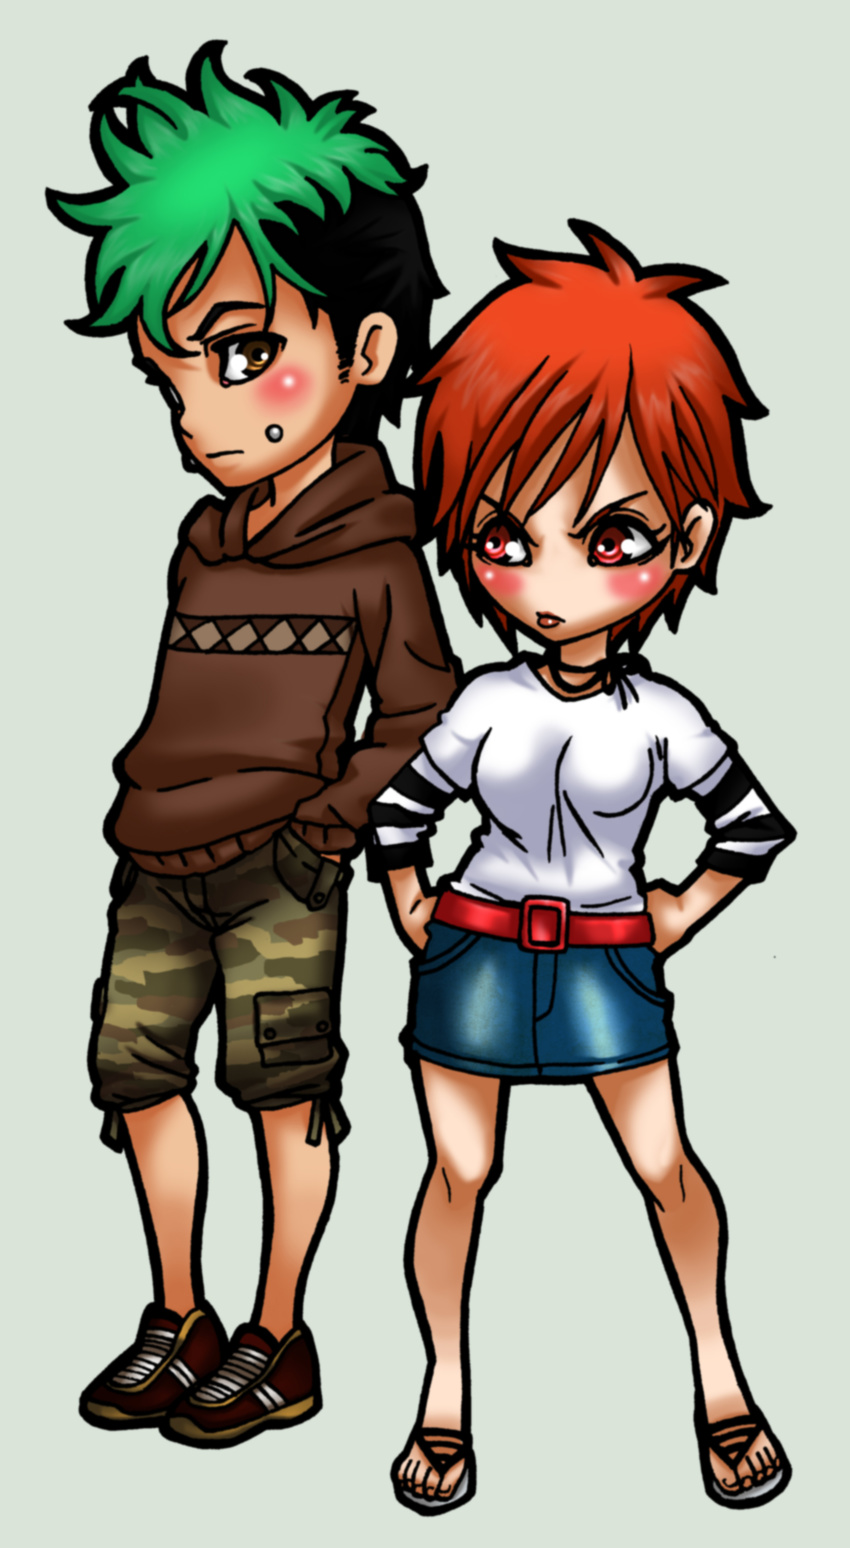 angry belt black black_hair blush bow boy brown brown_eyes buckle camouflage chibi choker couple female frown girl green green_hair mad male necklace piercing pockets pout red red_eyes red_hair ribbon sandals shorts skirt sleeves standing stare string stripes upset